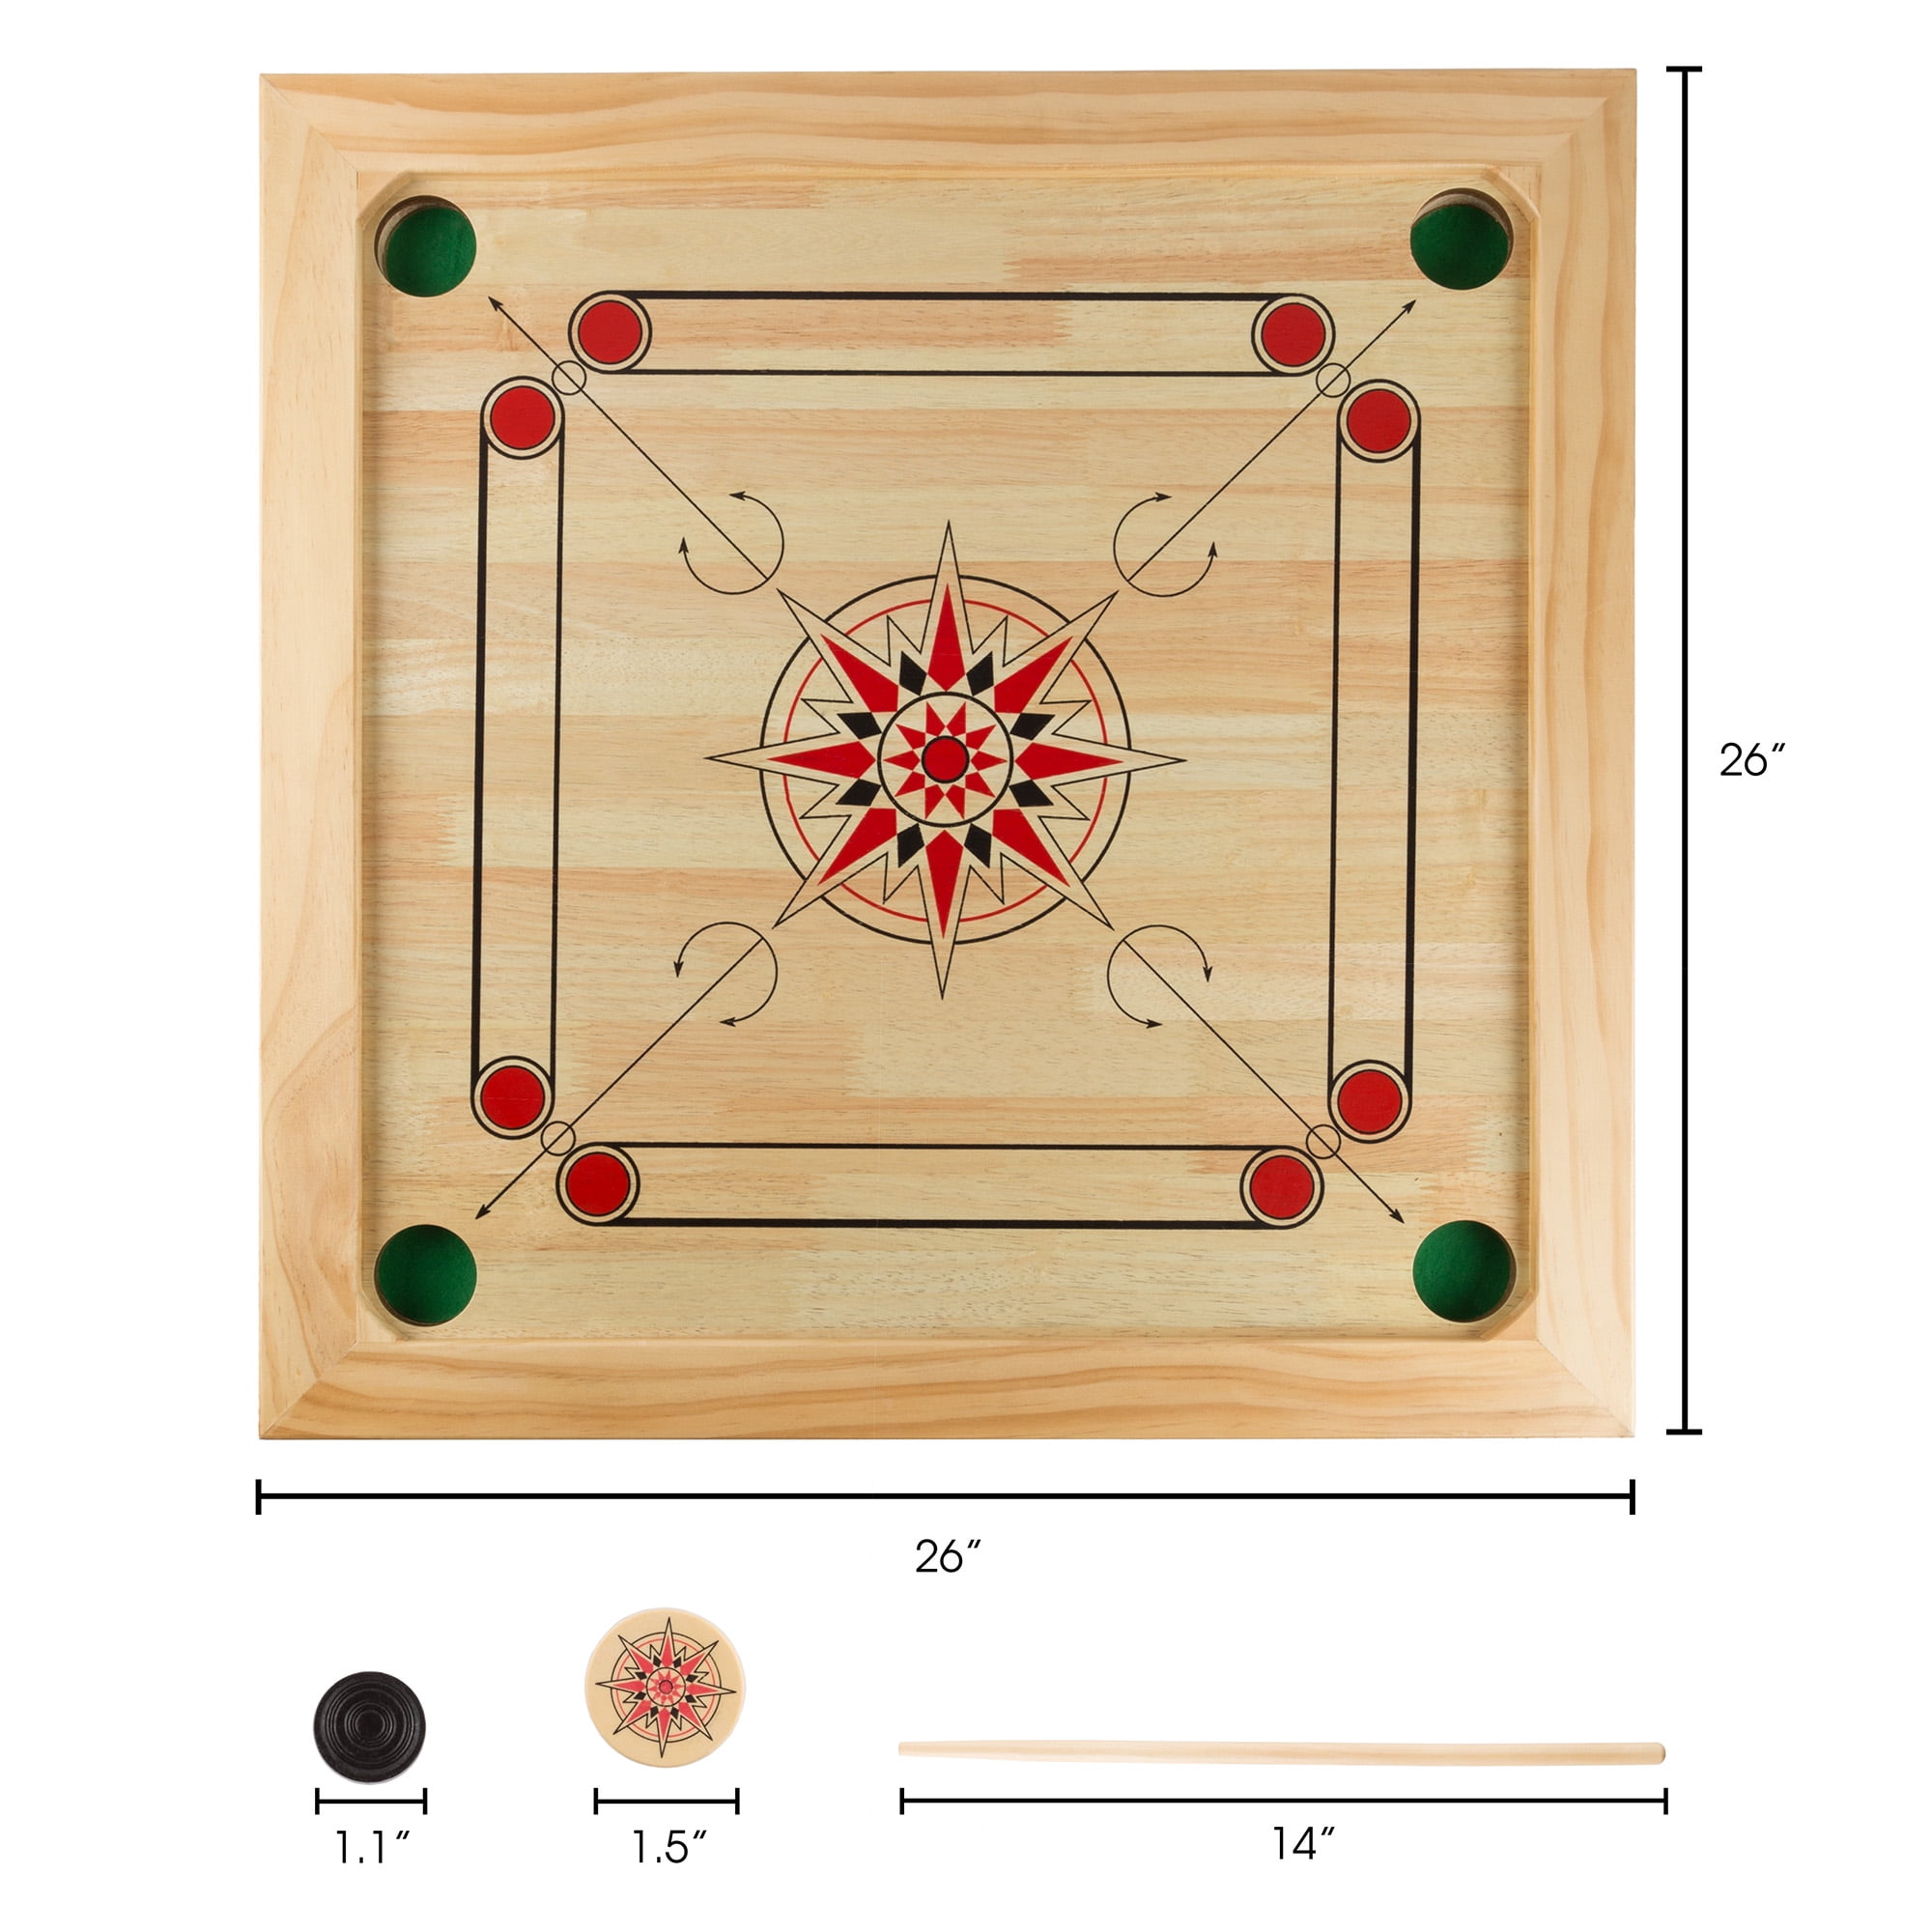 Details about   Pro 33" Large Carrom Board Wooden Game With Coins & Striker 296-AOMH 